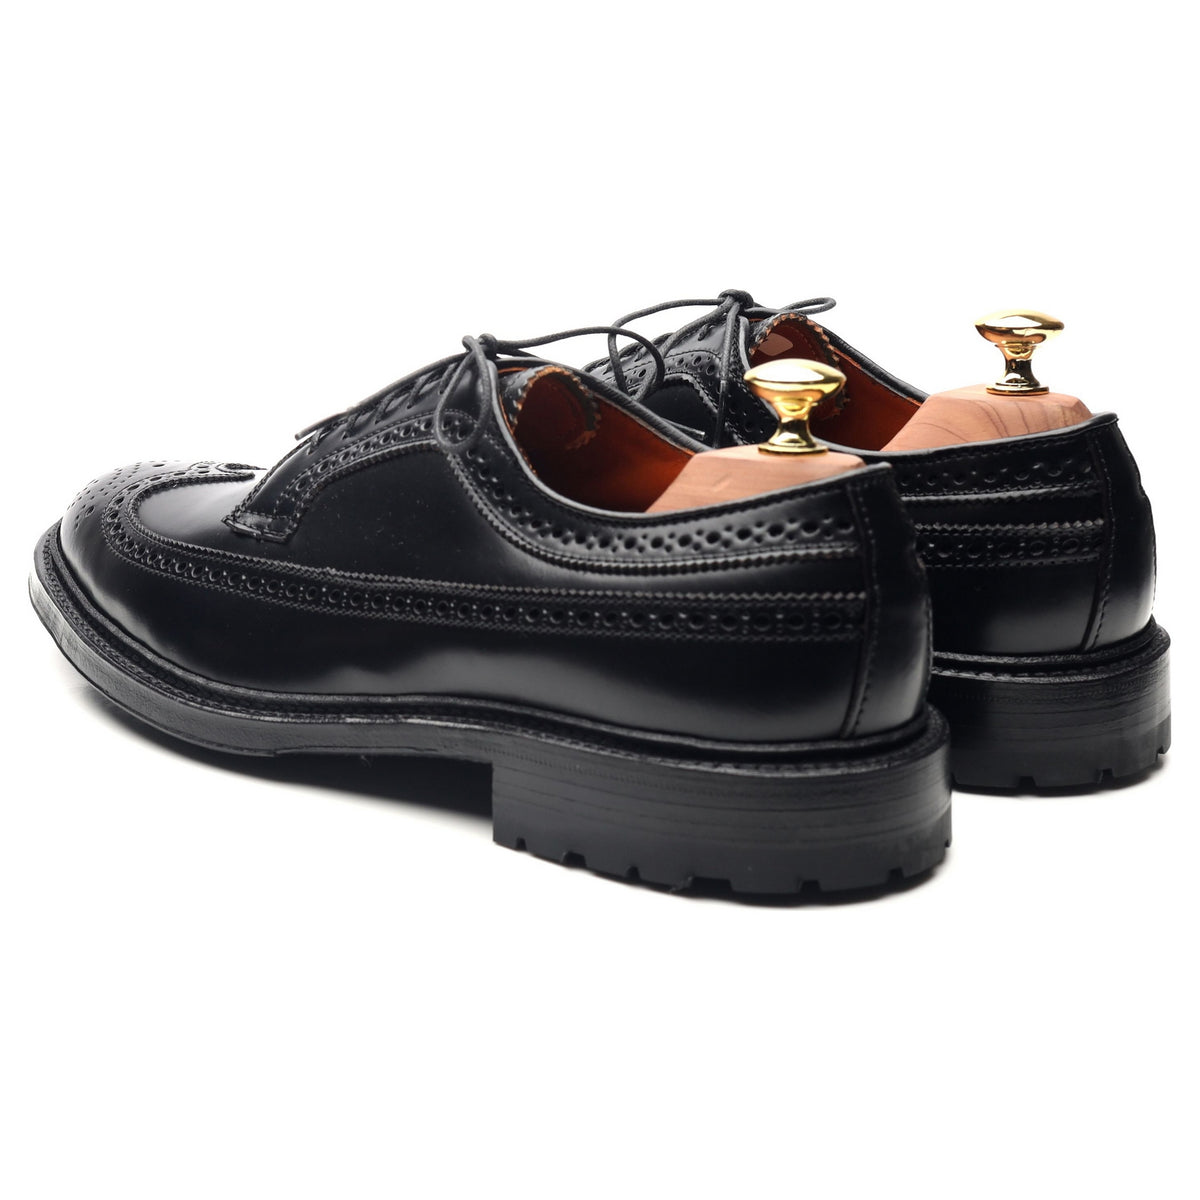 9751' Black Cordovan Leather Derby Brogues UK 8 US  - Abbot's Shoes